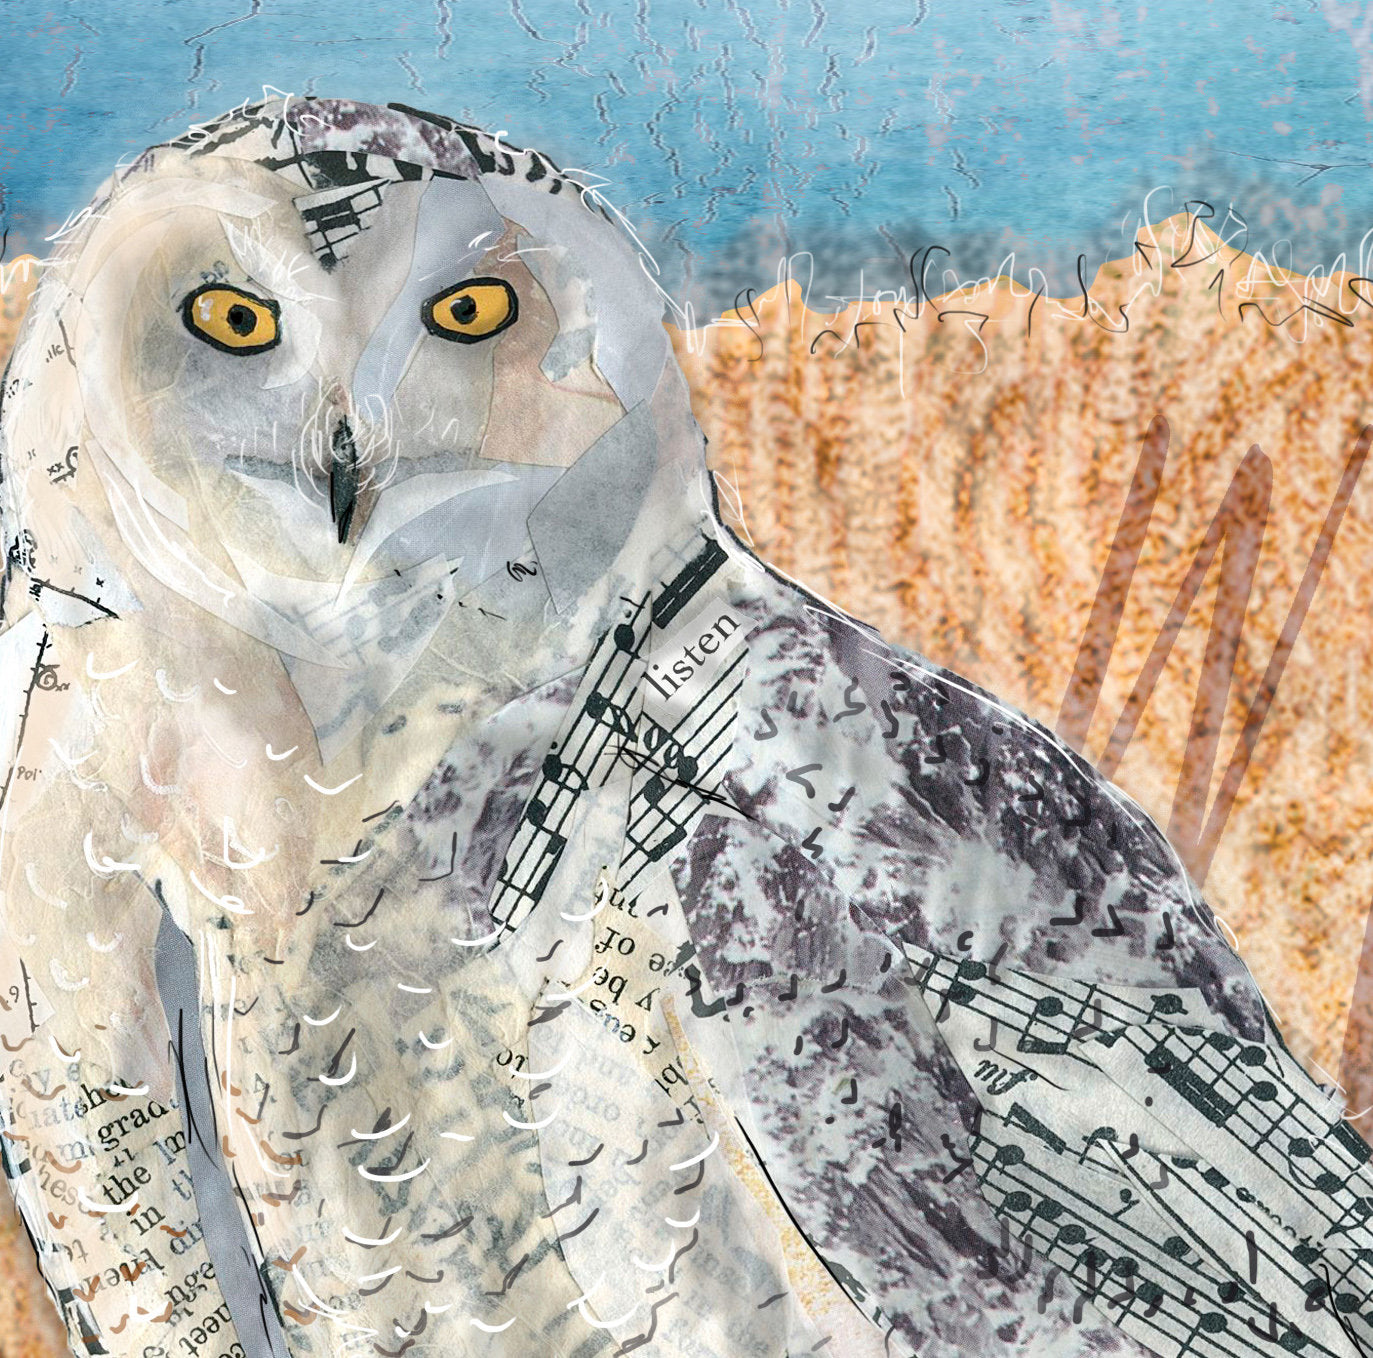 20"x16"x 1.5" Wrapped Canvas Printof a mixed media collage of a Snowy Owl perched on a fence post with birdwatcher in background